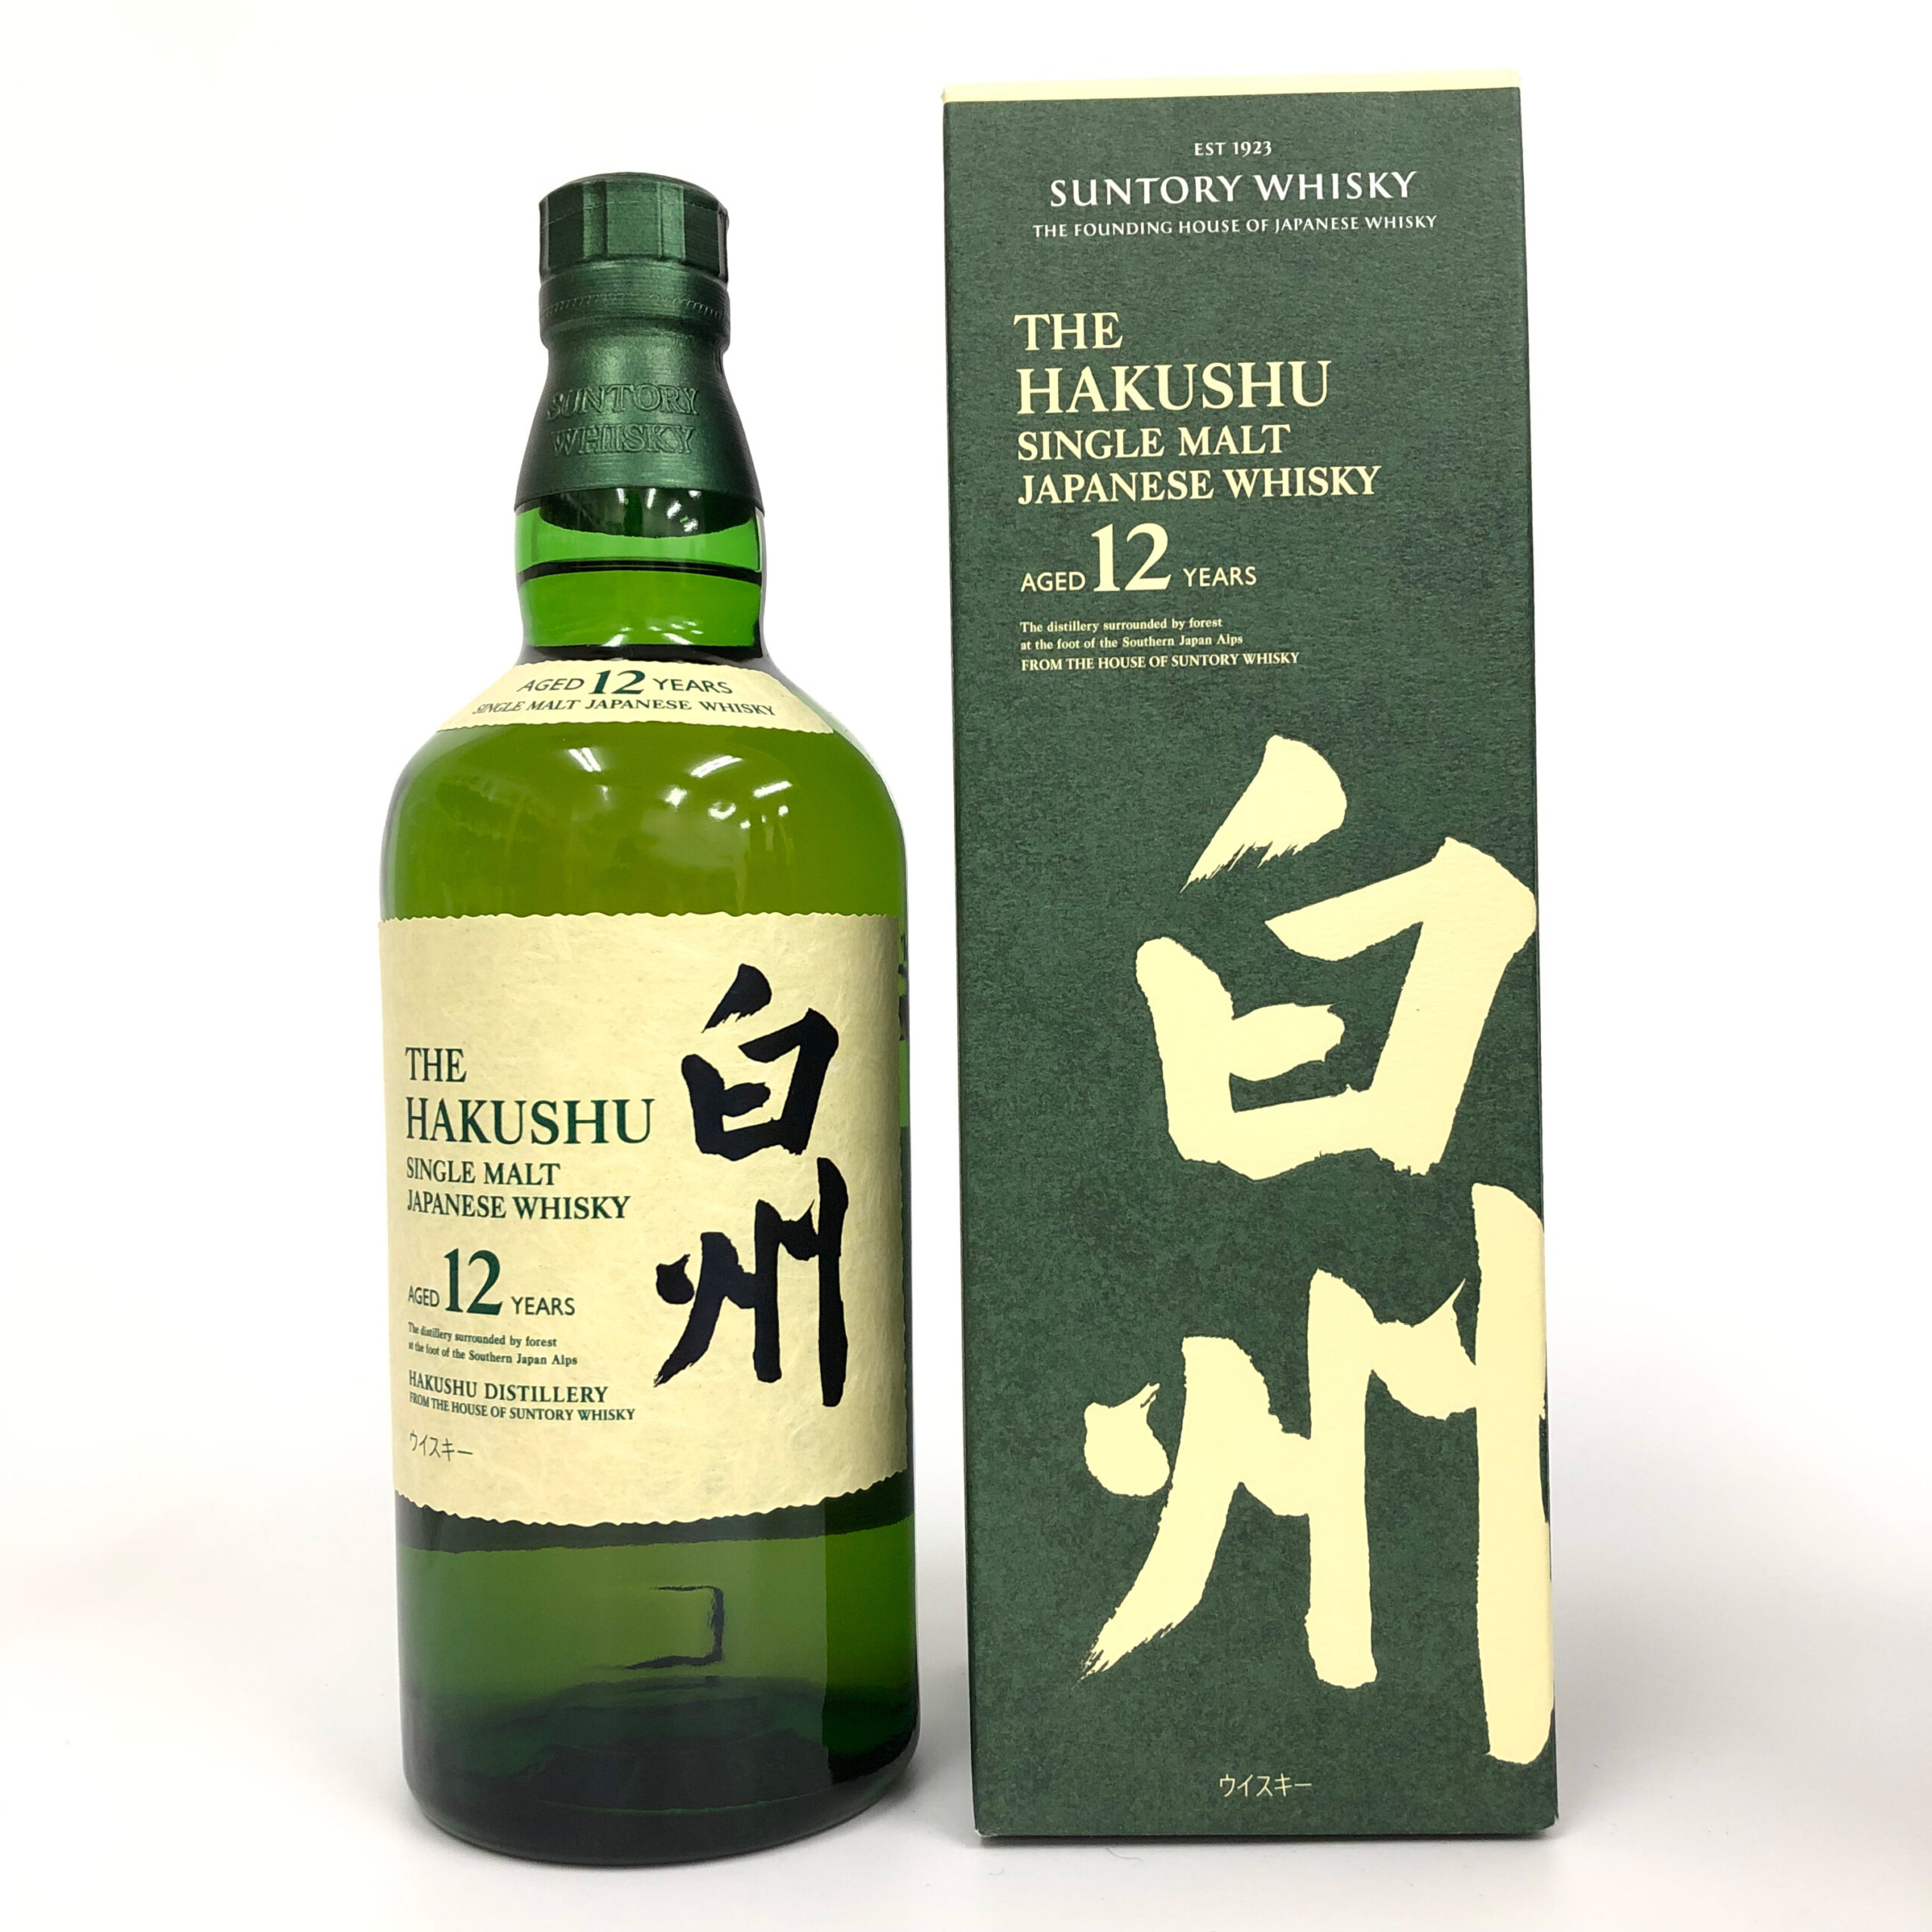 【Suntory Hakushu series.】「Hakusyu 12year.」Single malt whisky made exclusively from the original spirit produced at the Hakushu distillery, known as the 'distillery in the forest'. The second most popular series after Yamazaki and Hibiki, it is recommended to be drunk as a highball.